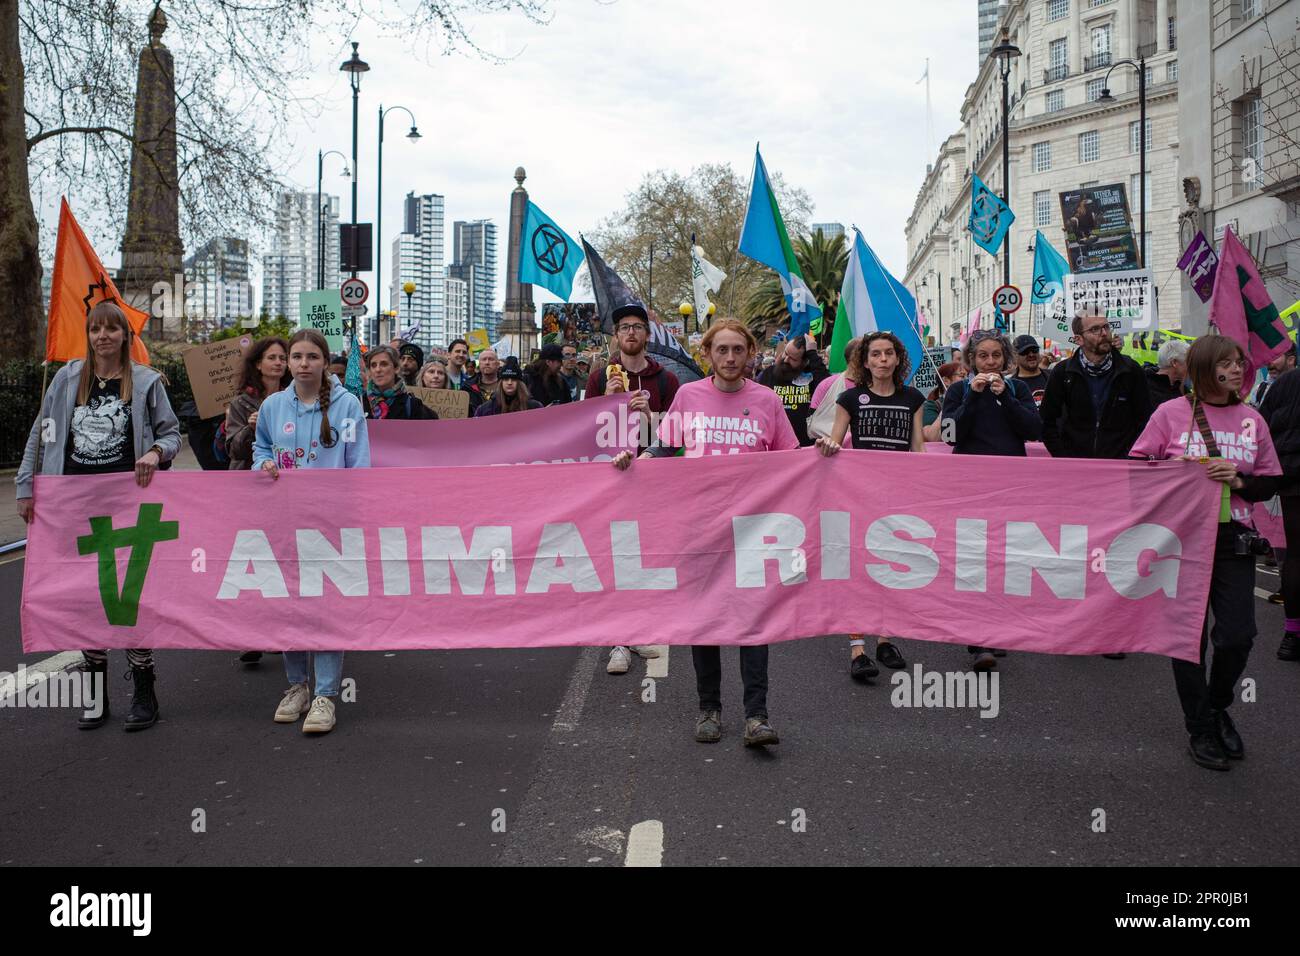 Activist group 'Animal Rising' march towards parliament on Earth Day, The Big One, Extinction Rebellion carrying a pink protest banner. London, April. Stock Photo